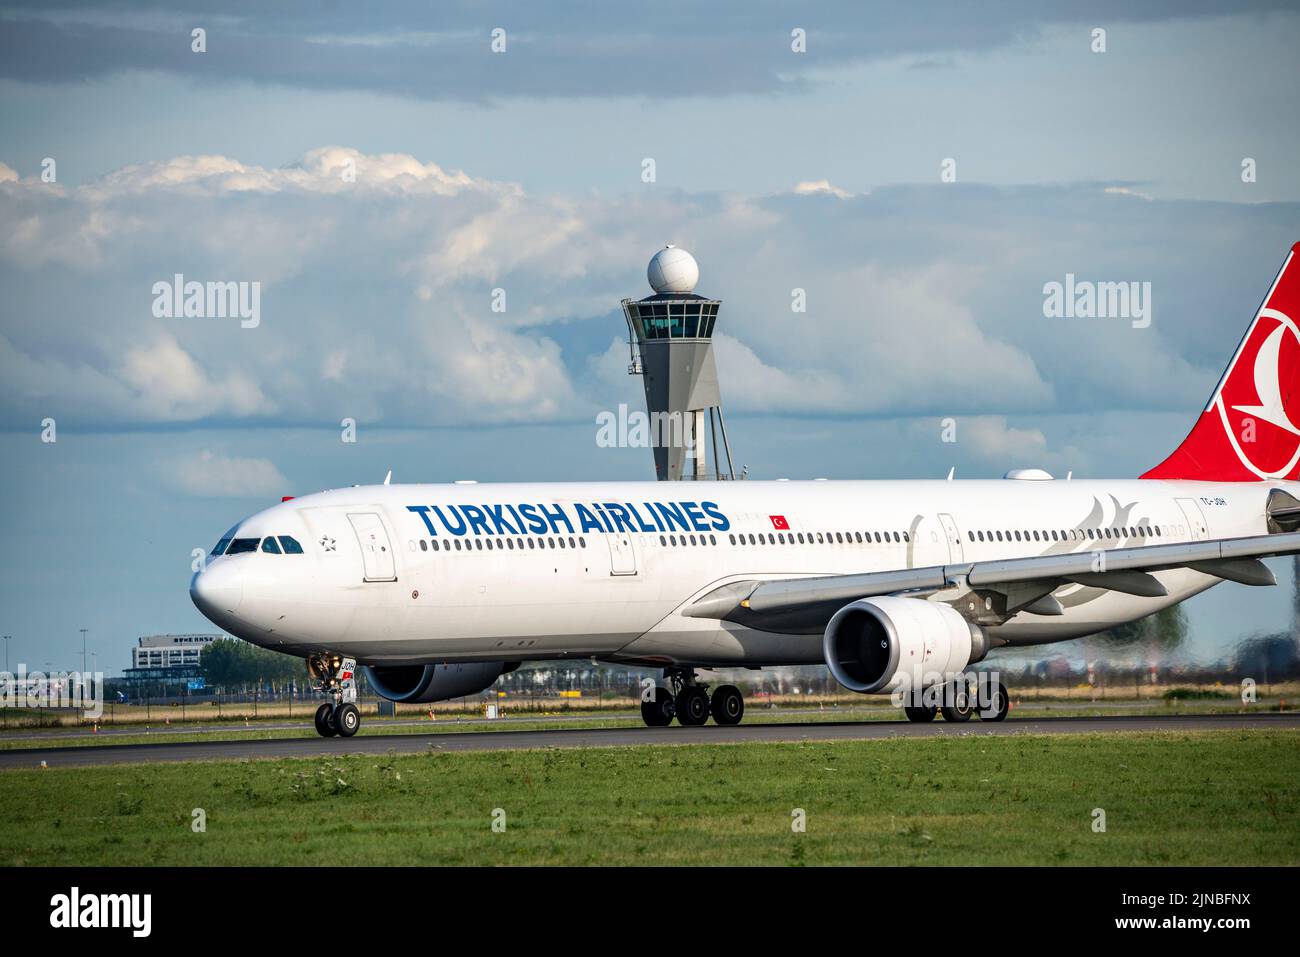 Amsterdam Shiphol Airport, Polderbaan, one of 6 runways, tower air traffic control, TC-JOH Turkish Airlines Airbus A330-300, taking off, Stock Photo